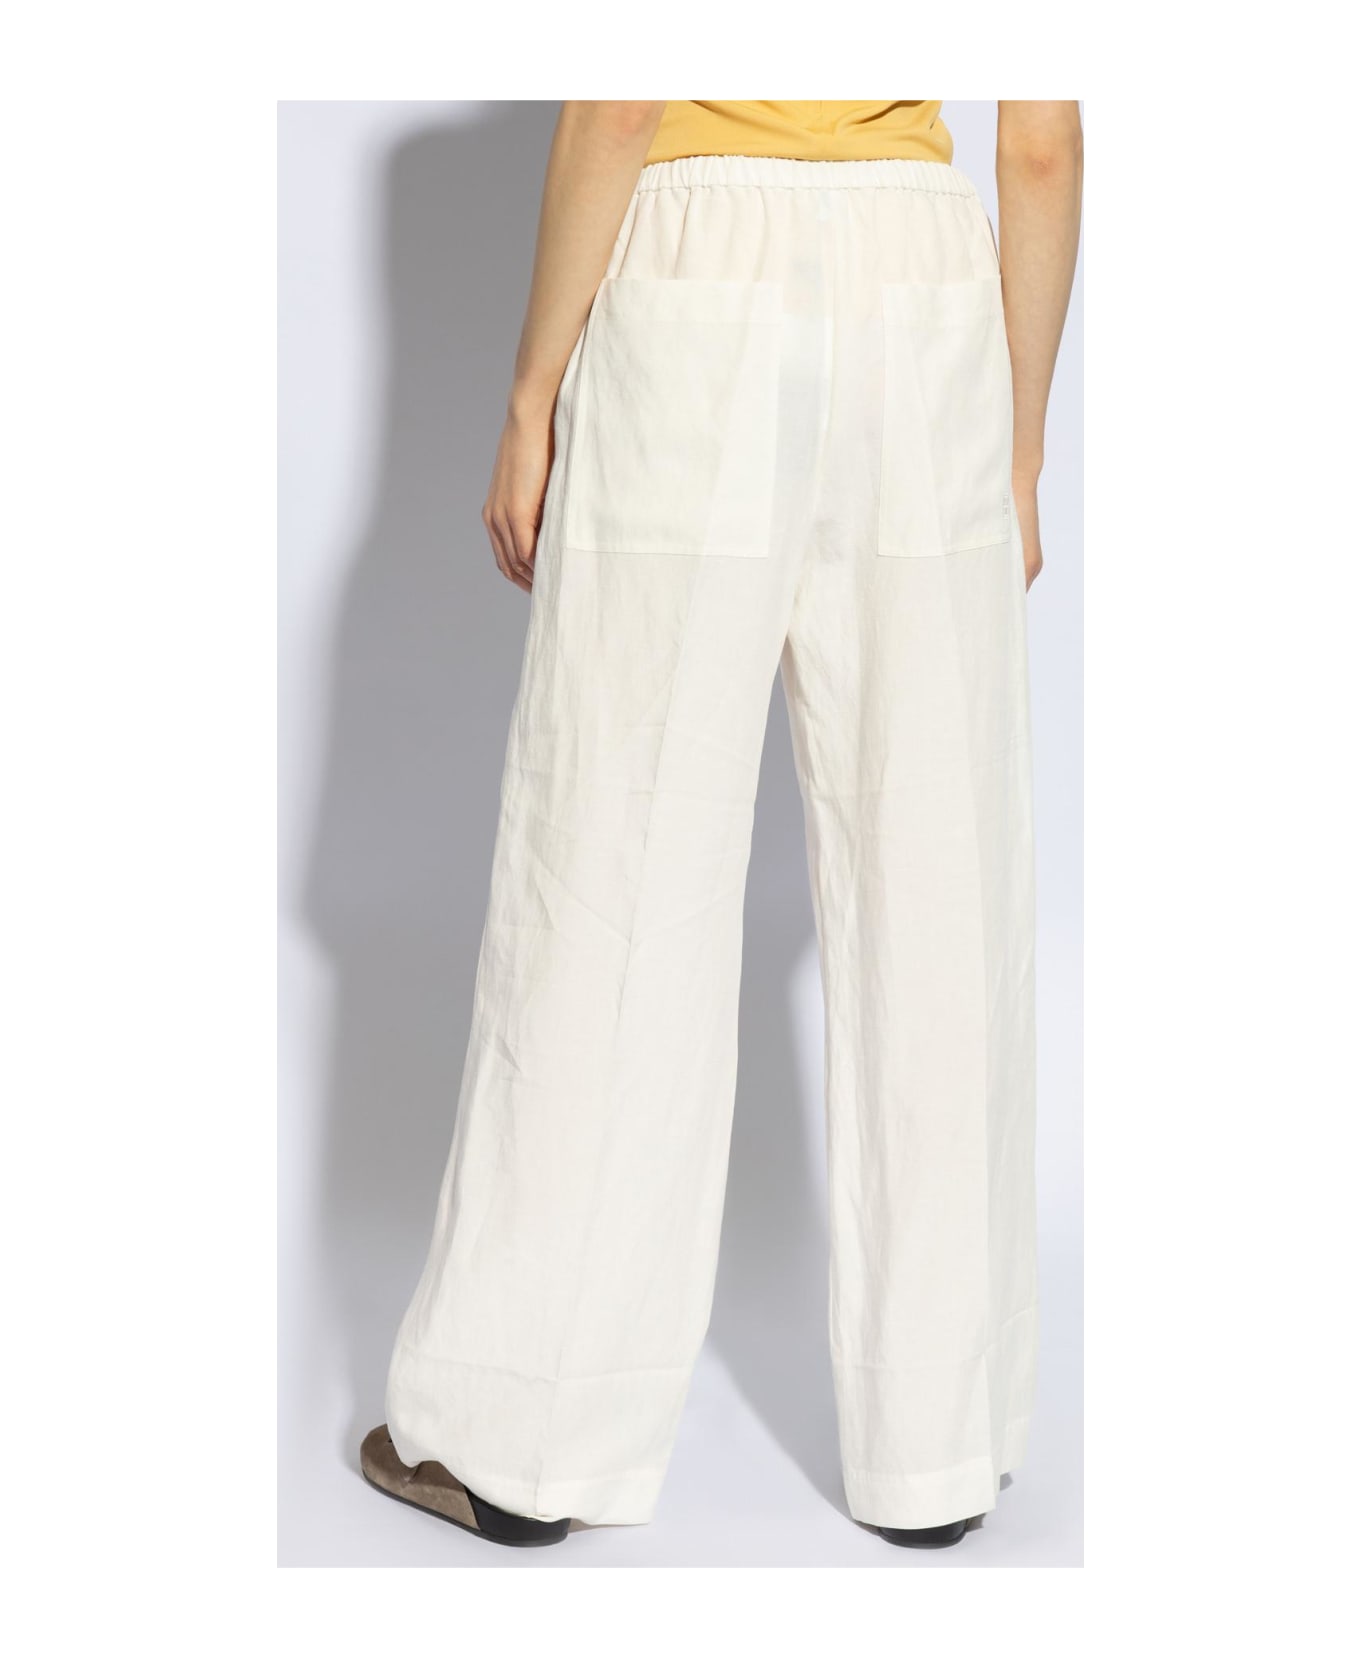 Totême Toteme Trousers With Pockets - White